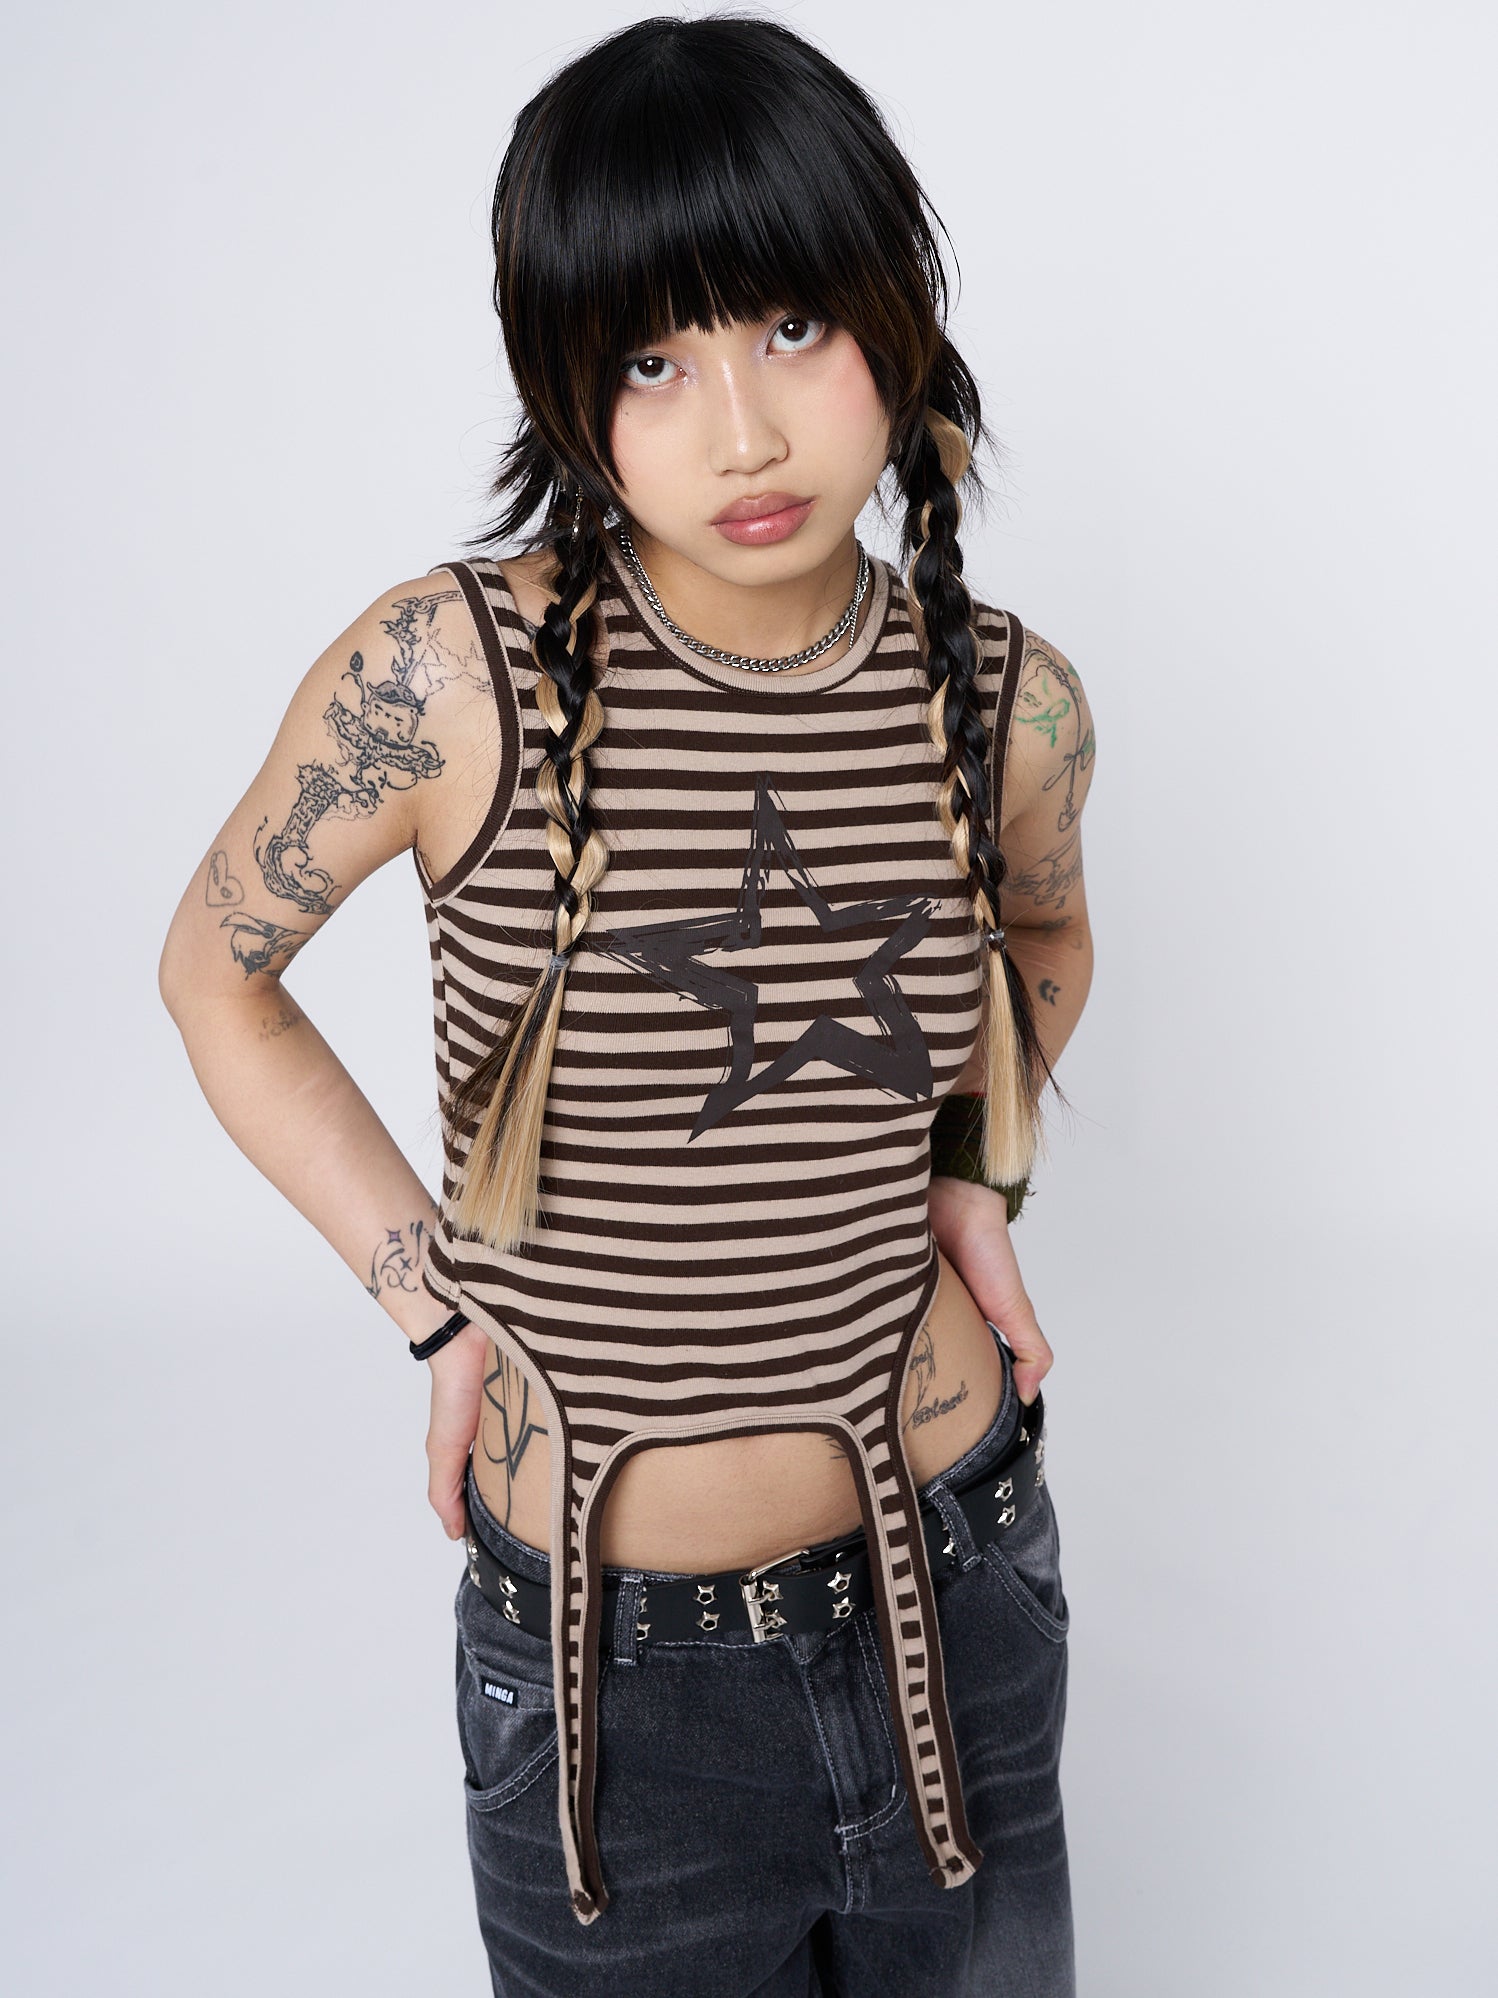 Fashion-forward and versatile vest featuring a stylish striped pattern and eye-catching star print.